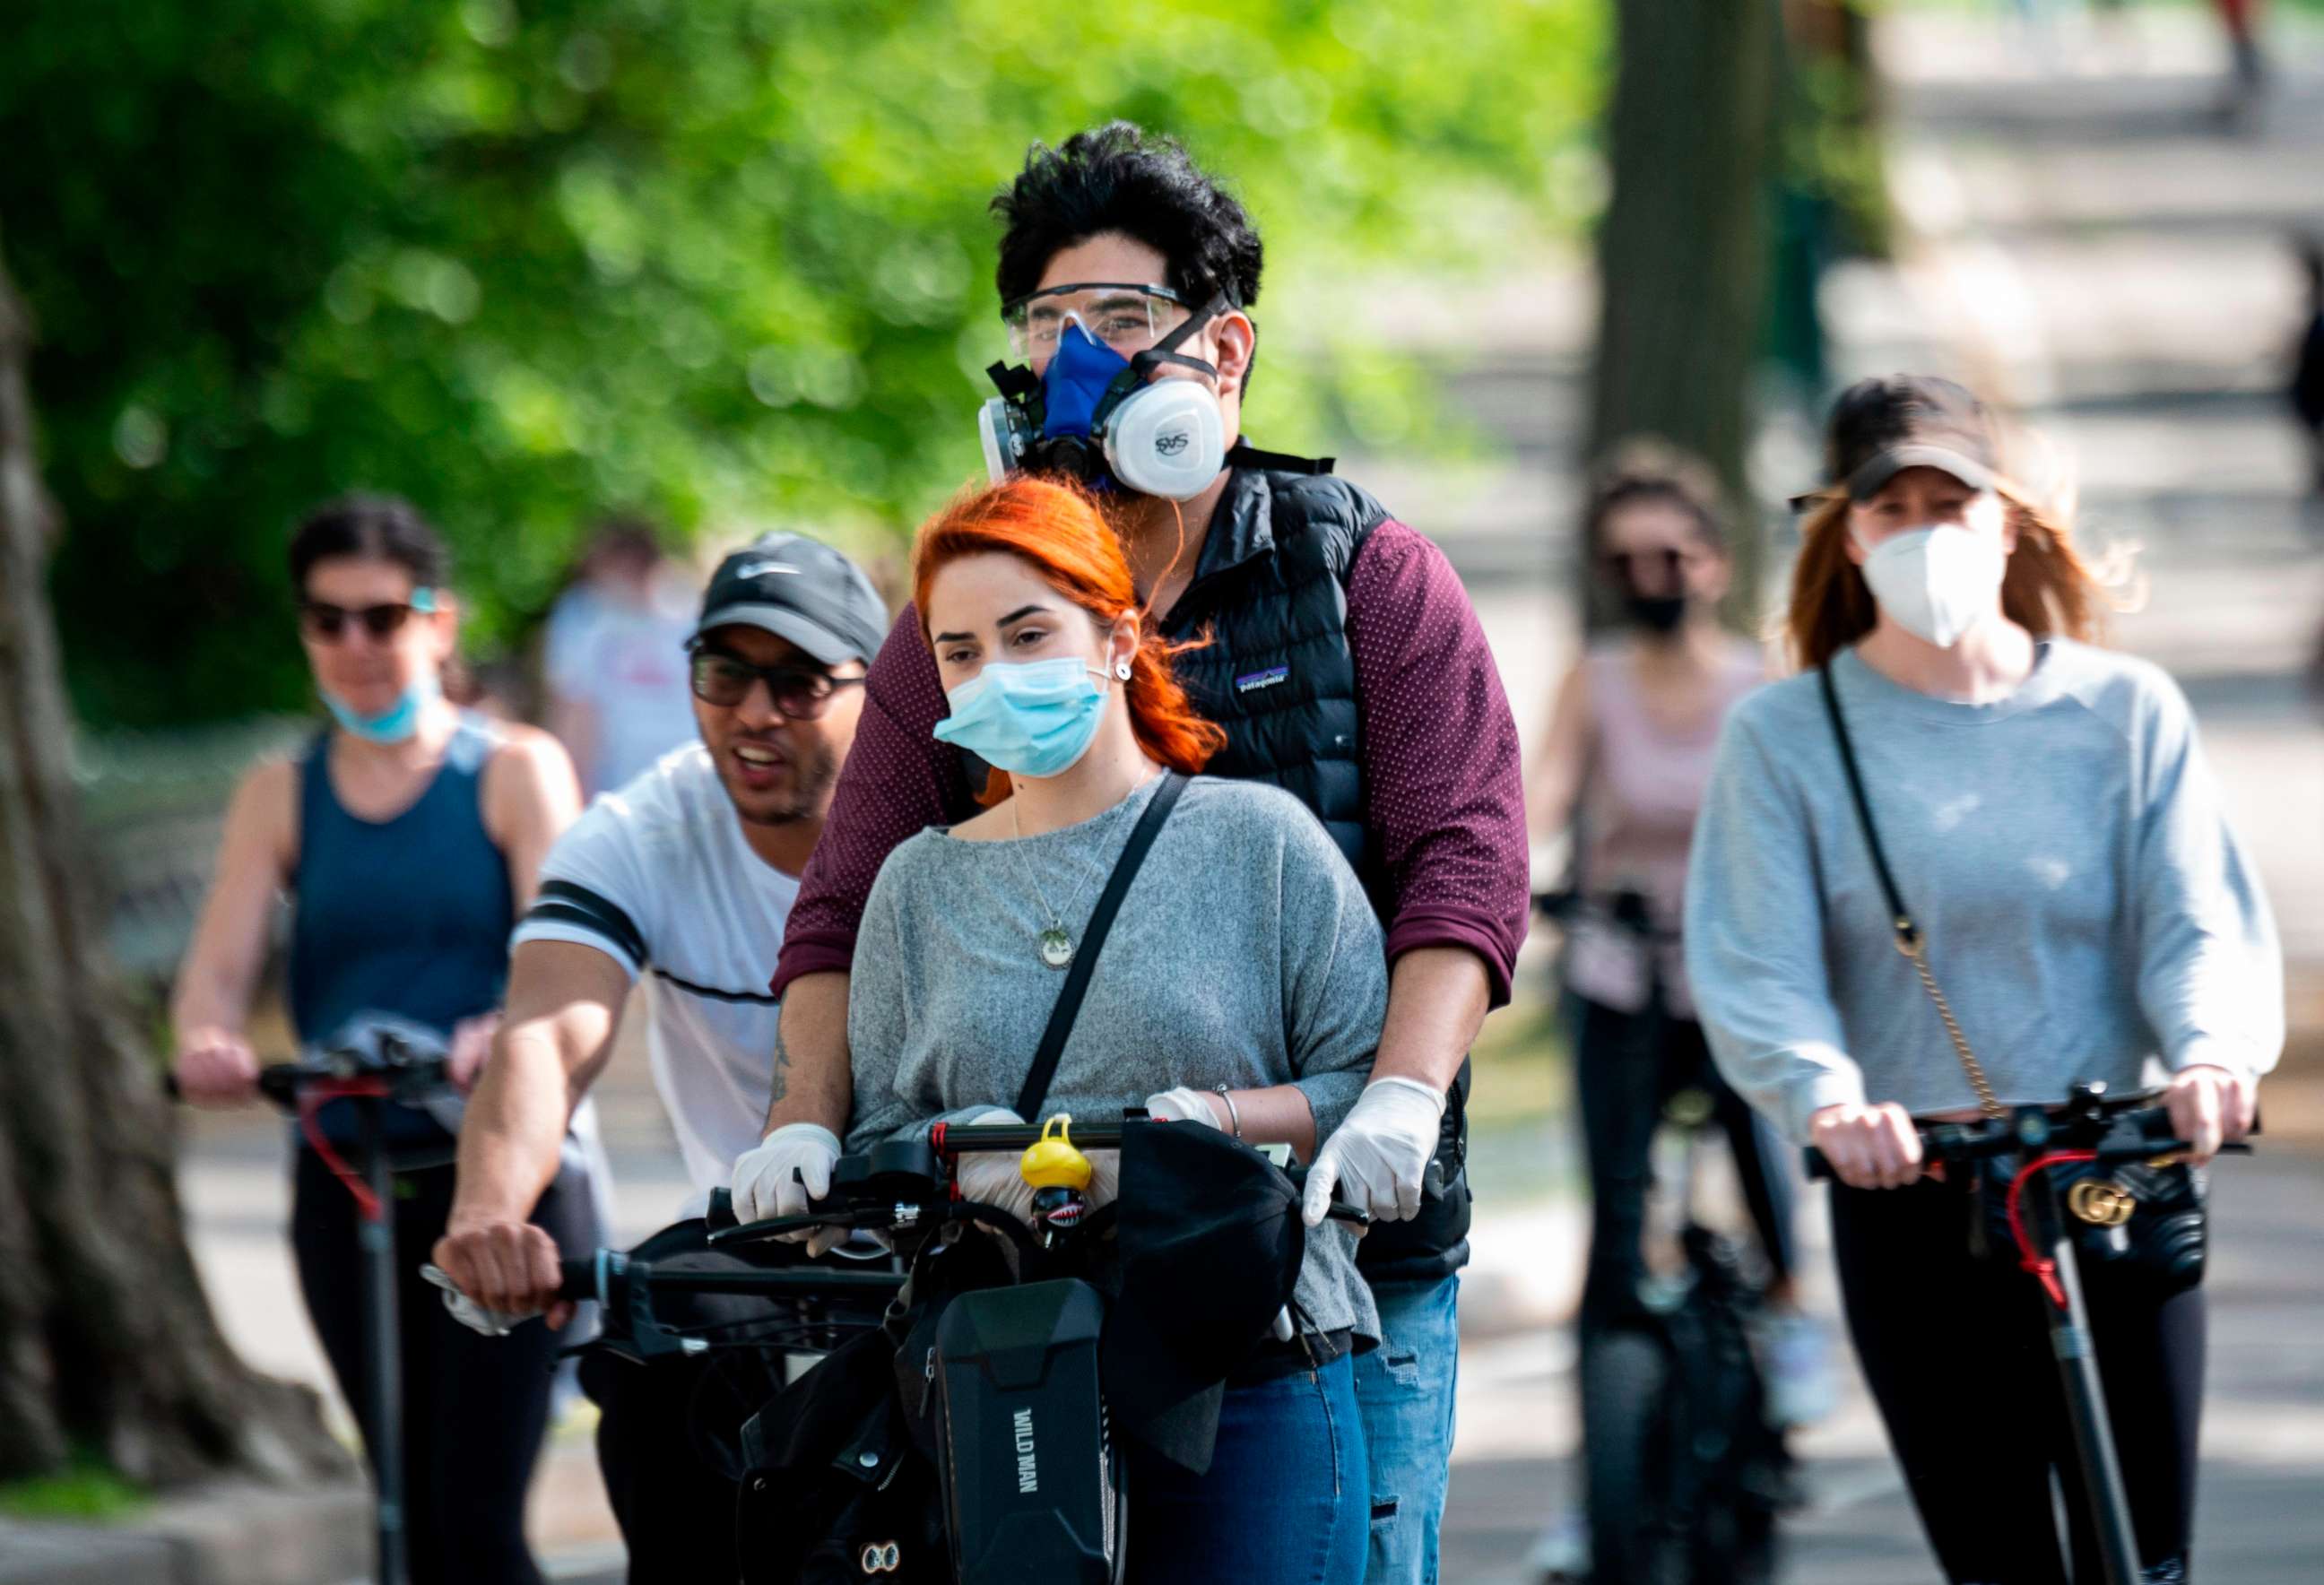 PHOTO: People wearing masks ride a scooter in Central Park on May 16, 2020 in New York City, amid the coronavirus pandemic.